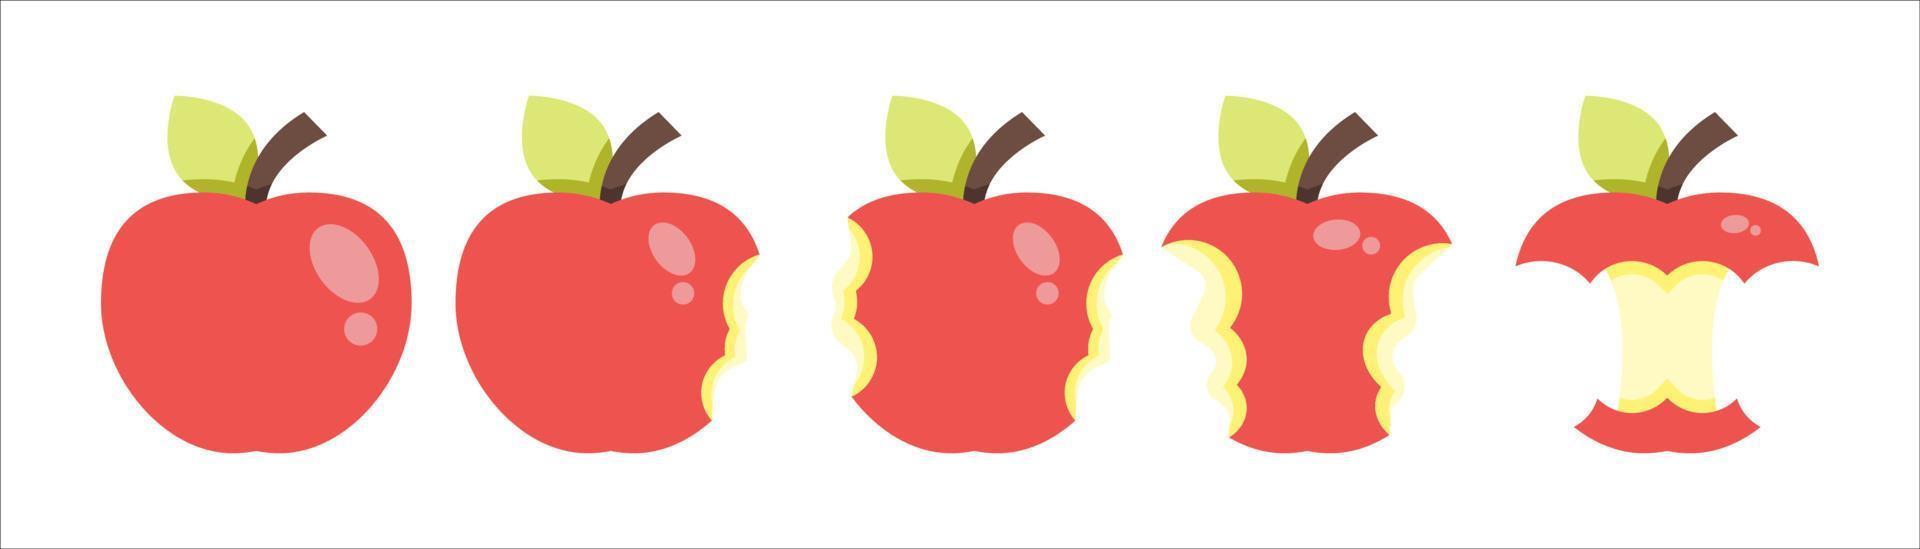 Set Of Various Flat Red Apple Bite Stage Illustration vector